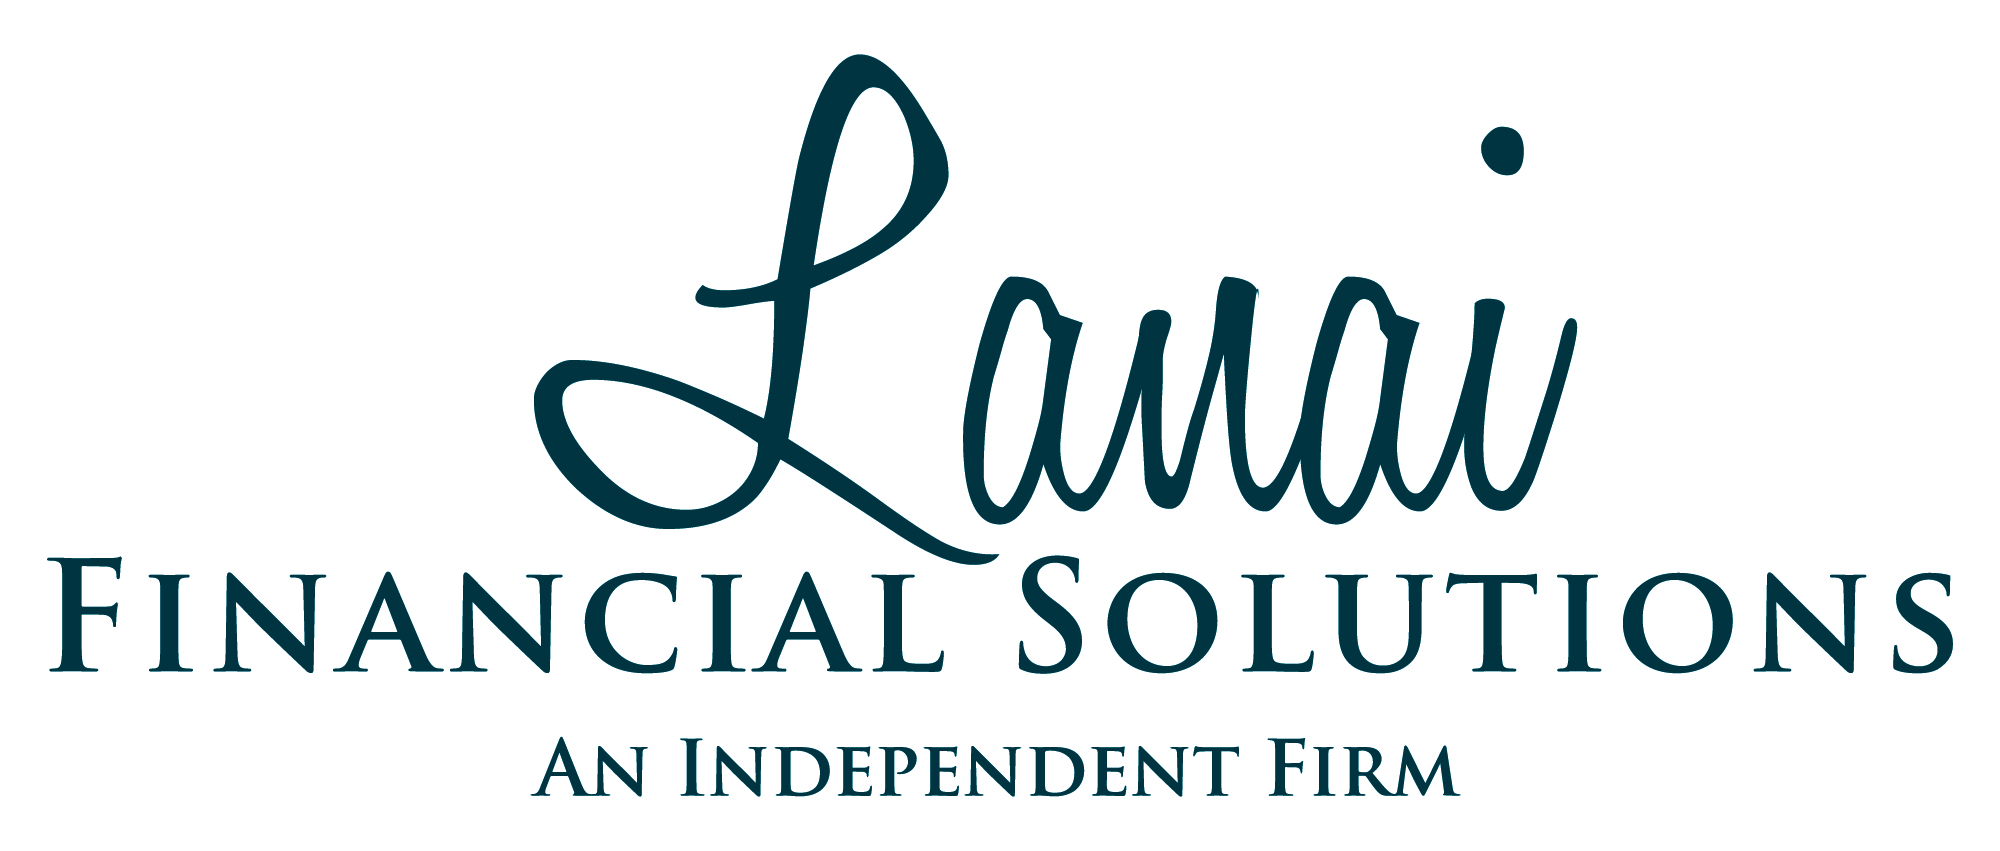 Lania Financial Solutions